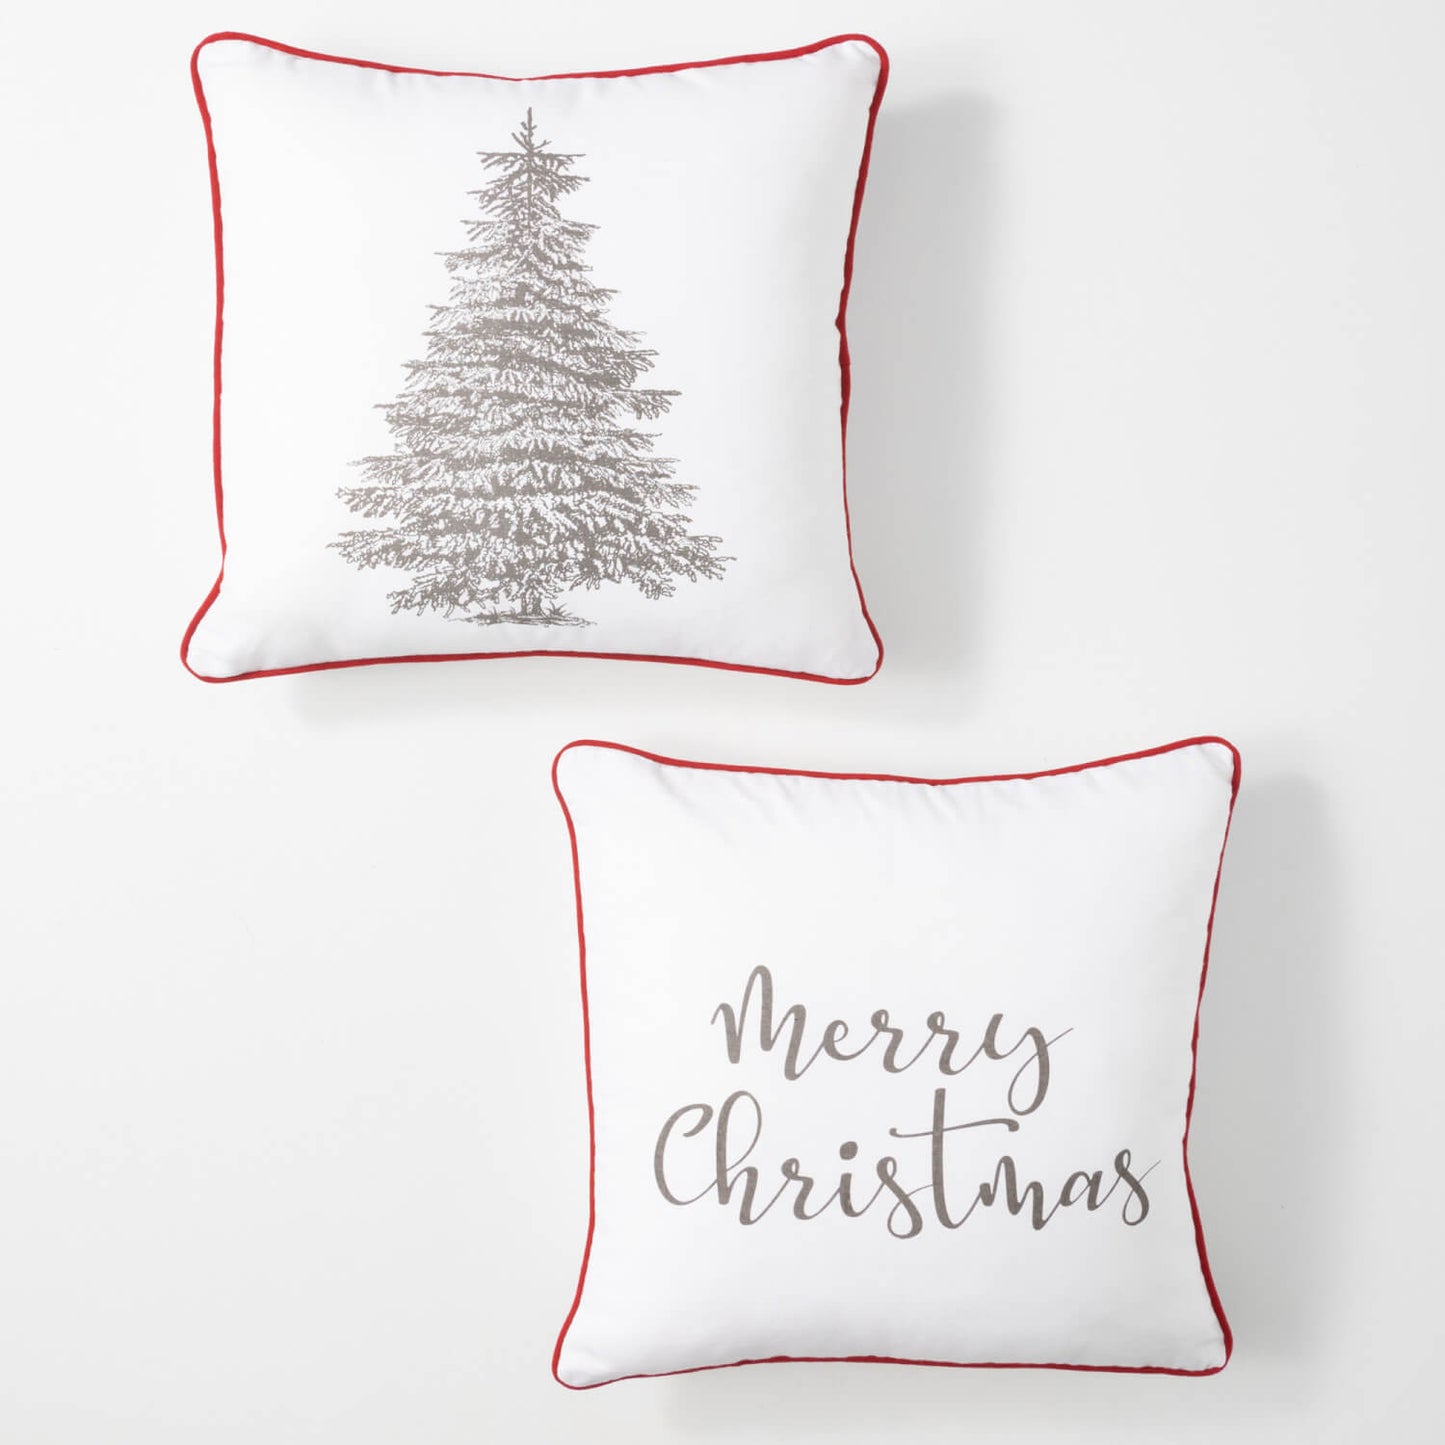 Merry Christmas or Woodland Tree Pillow